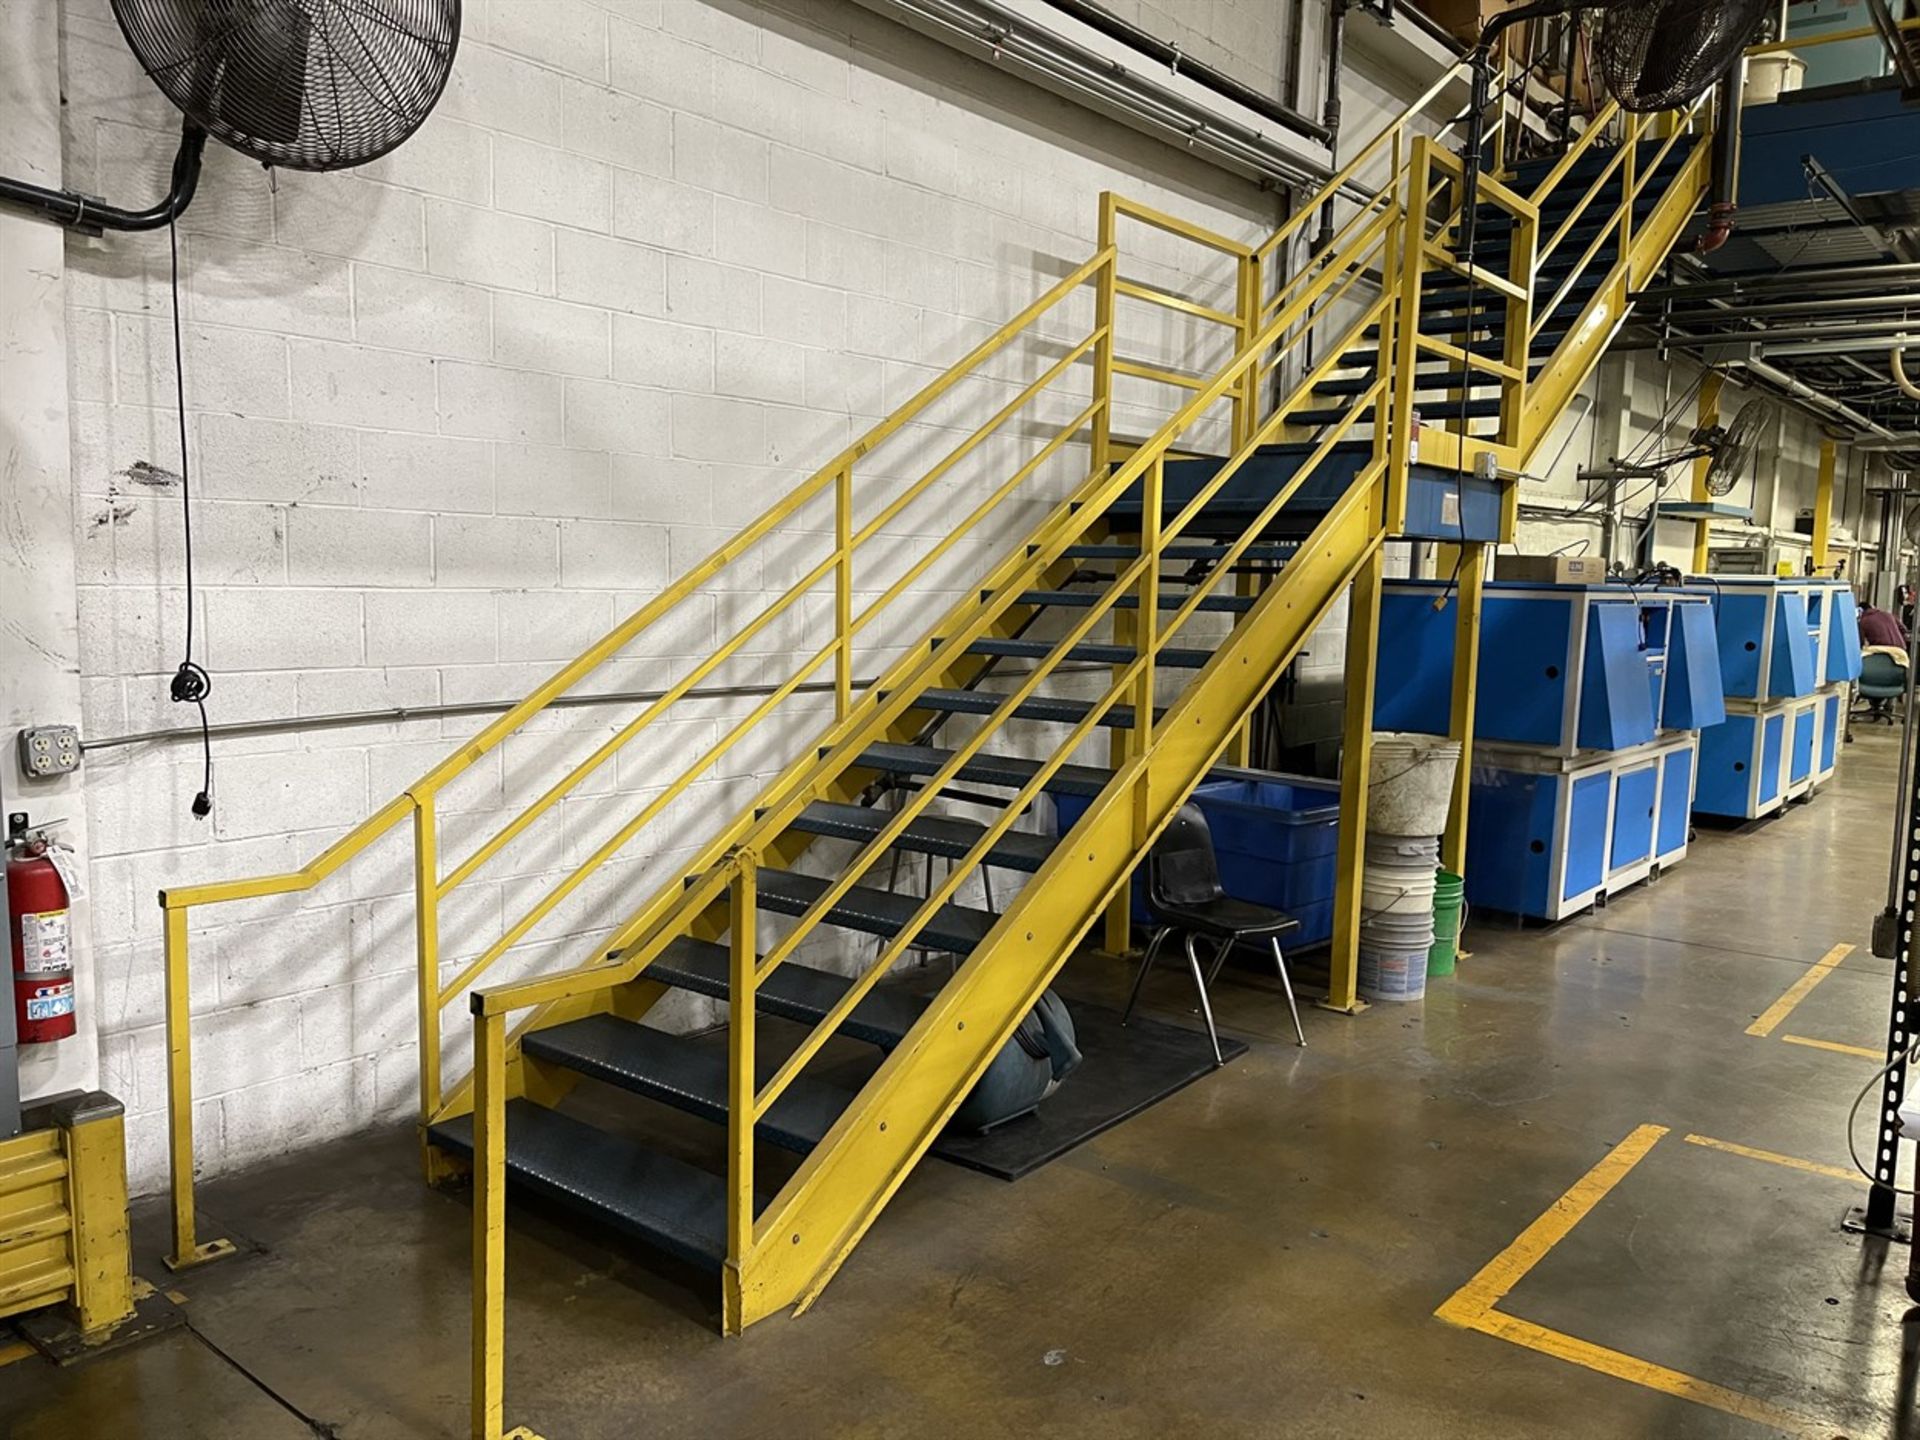 Mezzanine, 14'4"W x 120'L x 12' Under Deck, w/ (2) Staircases and (2) Loadout Gates - Image 2 of 13